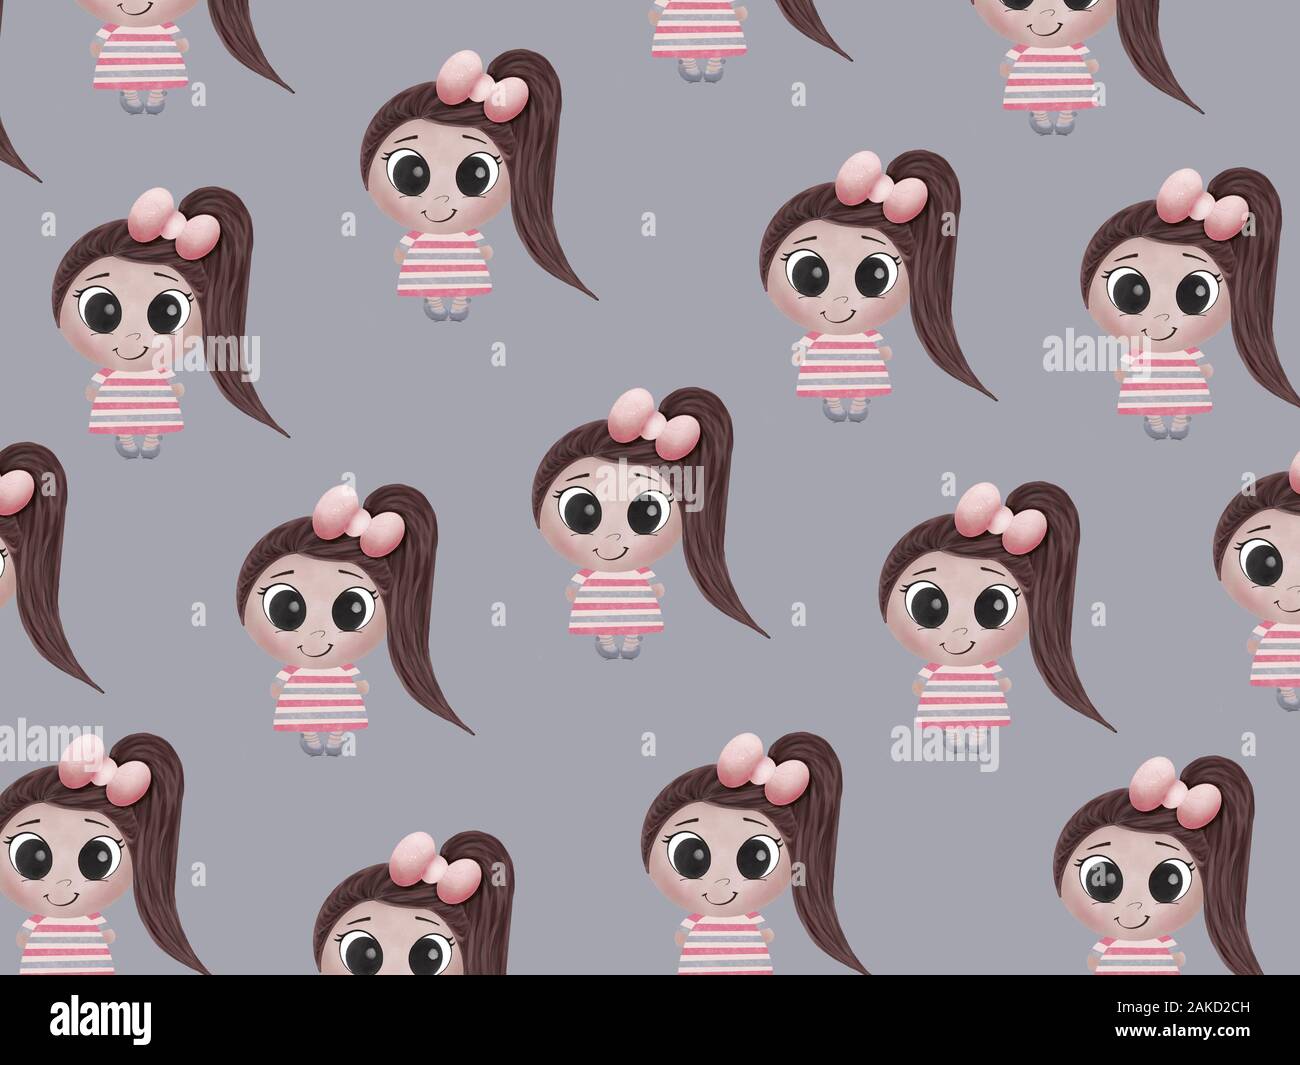 Illustration of a pattern with many cute dark-haired girls in pink and gray with a tail,in dress and bow on a gray background.Use in children's print Stock Photo